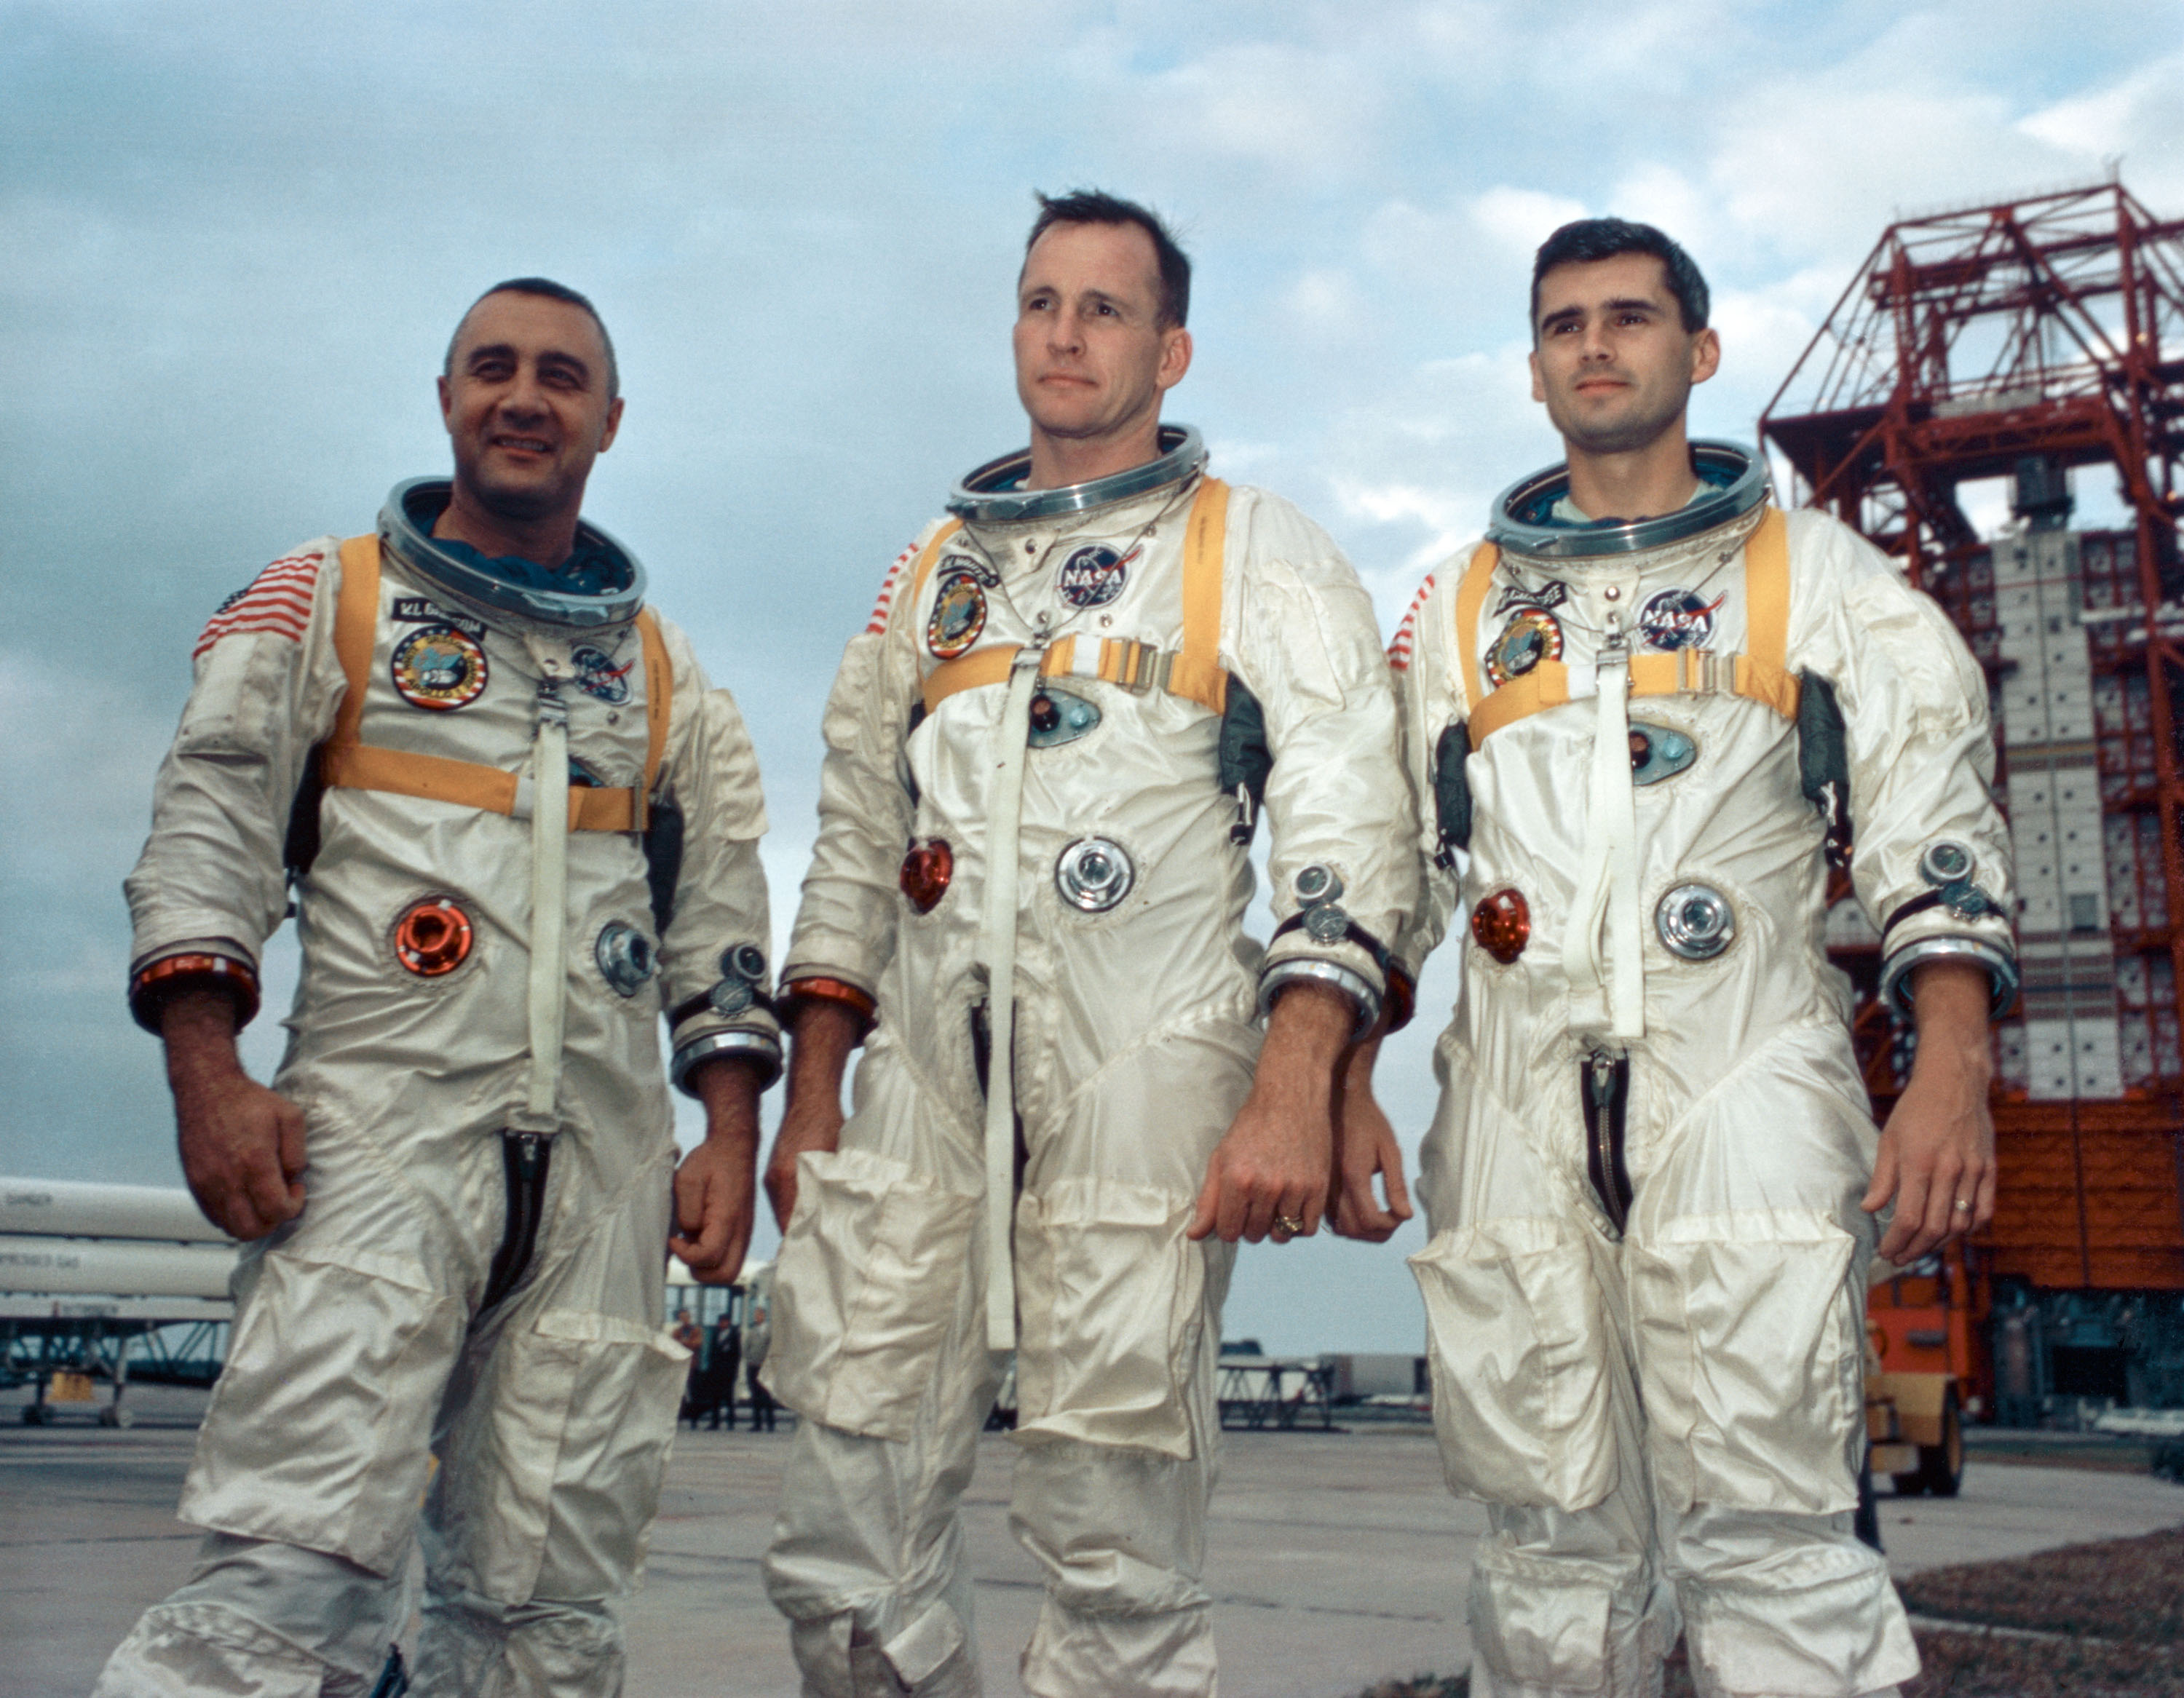 Astronauts, from the left, Gus Grissom, Ed White II and Roger Chaffee stand near Cape Kennedy's Launch Complex 34 during training for Apollo 1 in January 1967.